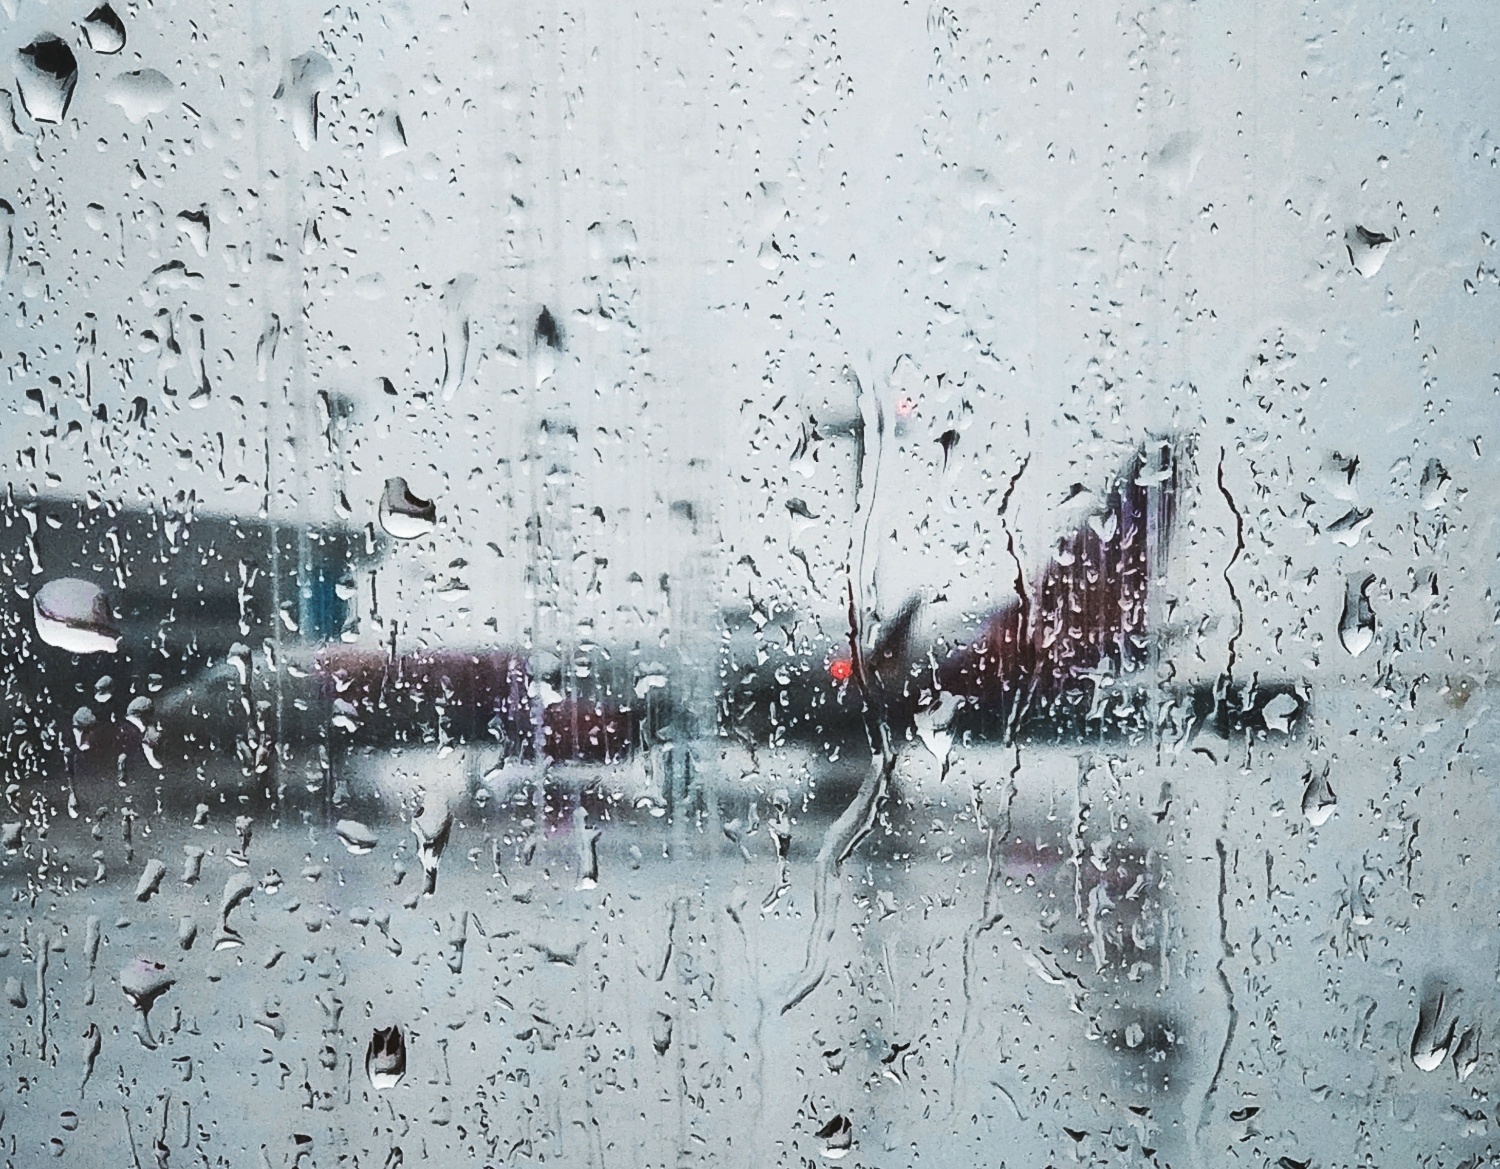 Airplane parked on the tarmac on a rainy day